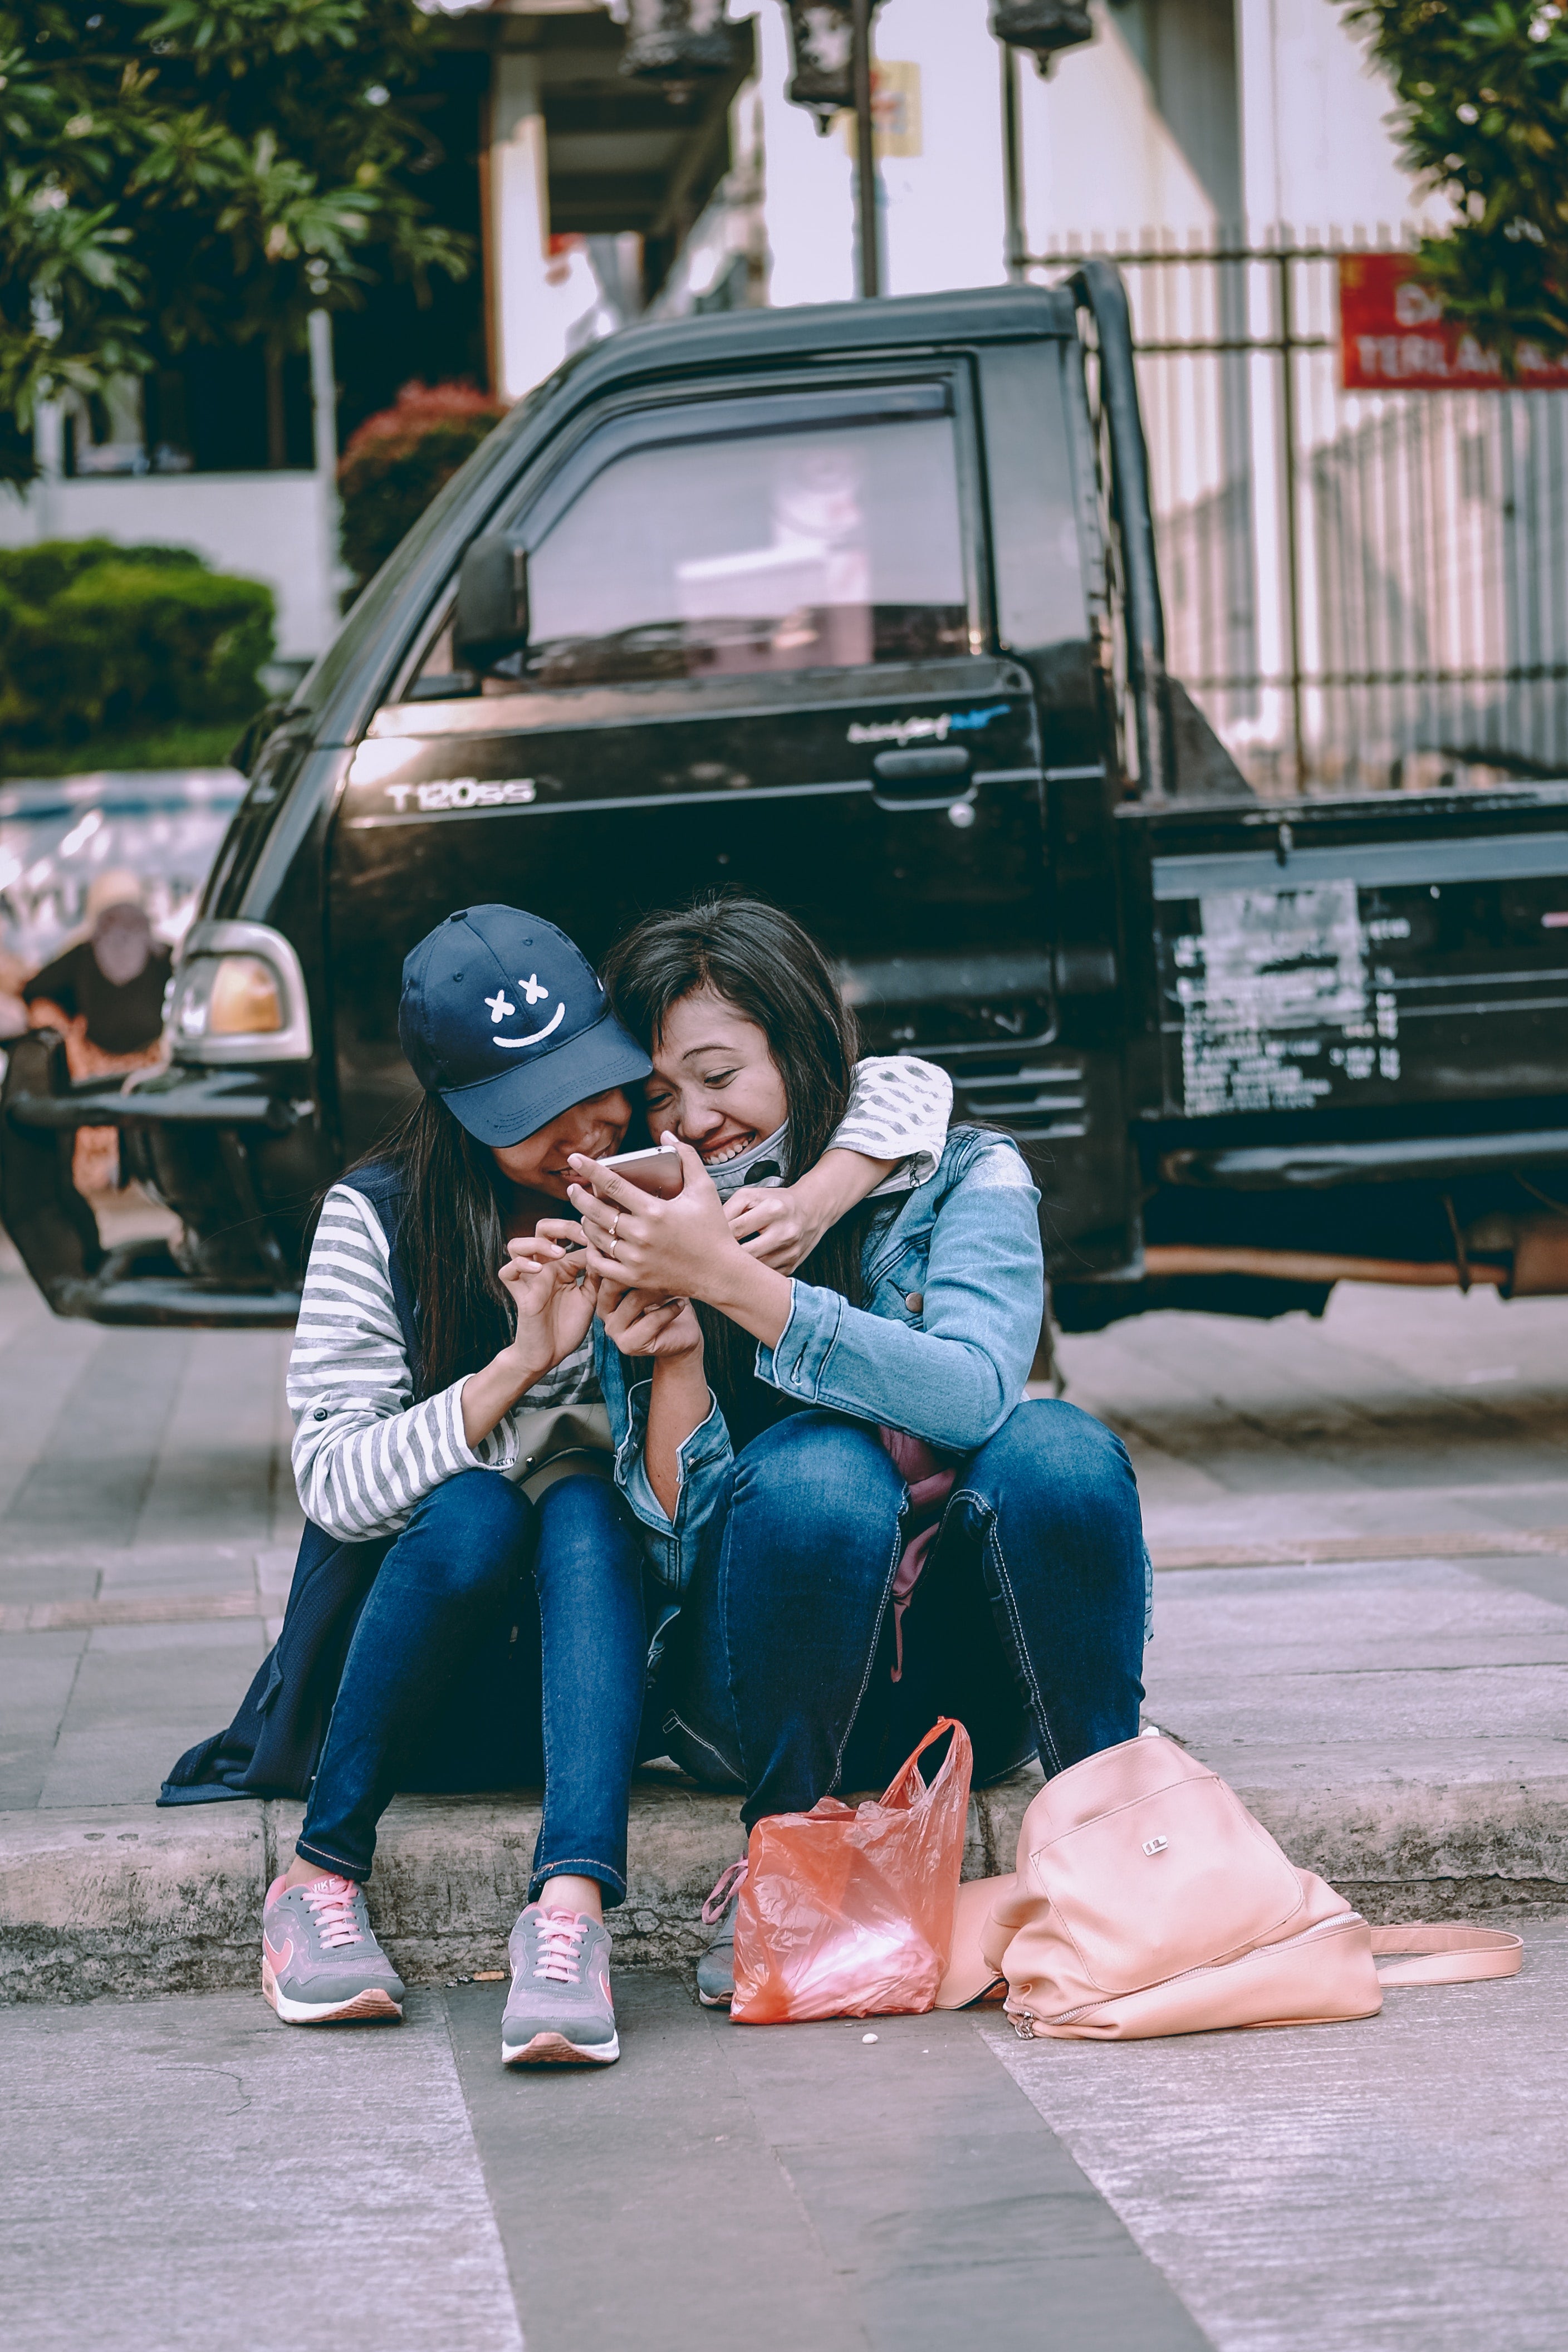 Two Teenagers Sitting on Curb Outside Laughing at Their iPhone - Sibling Photo Idea